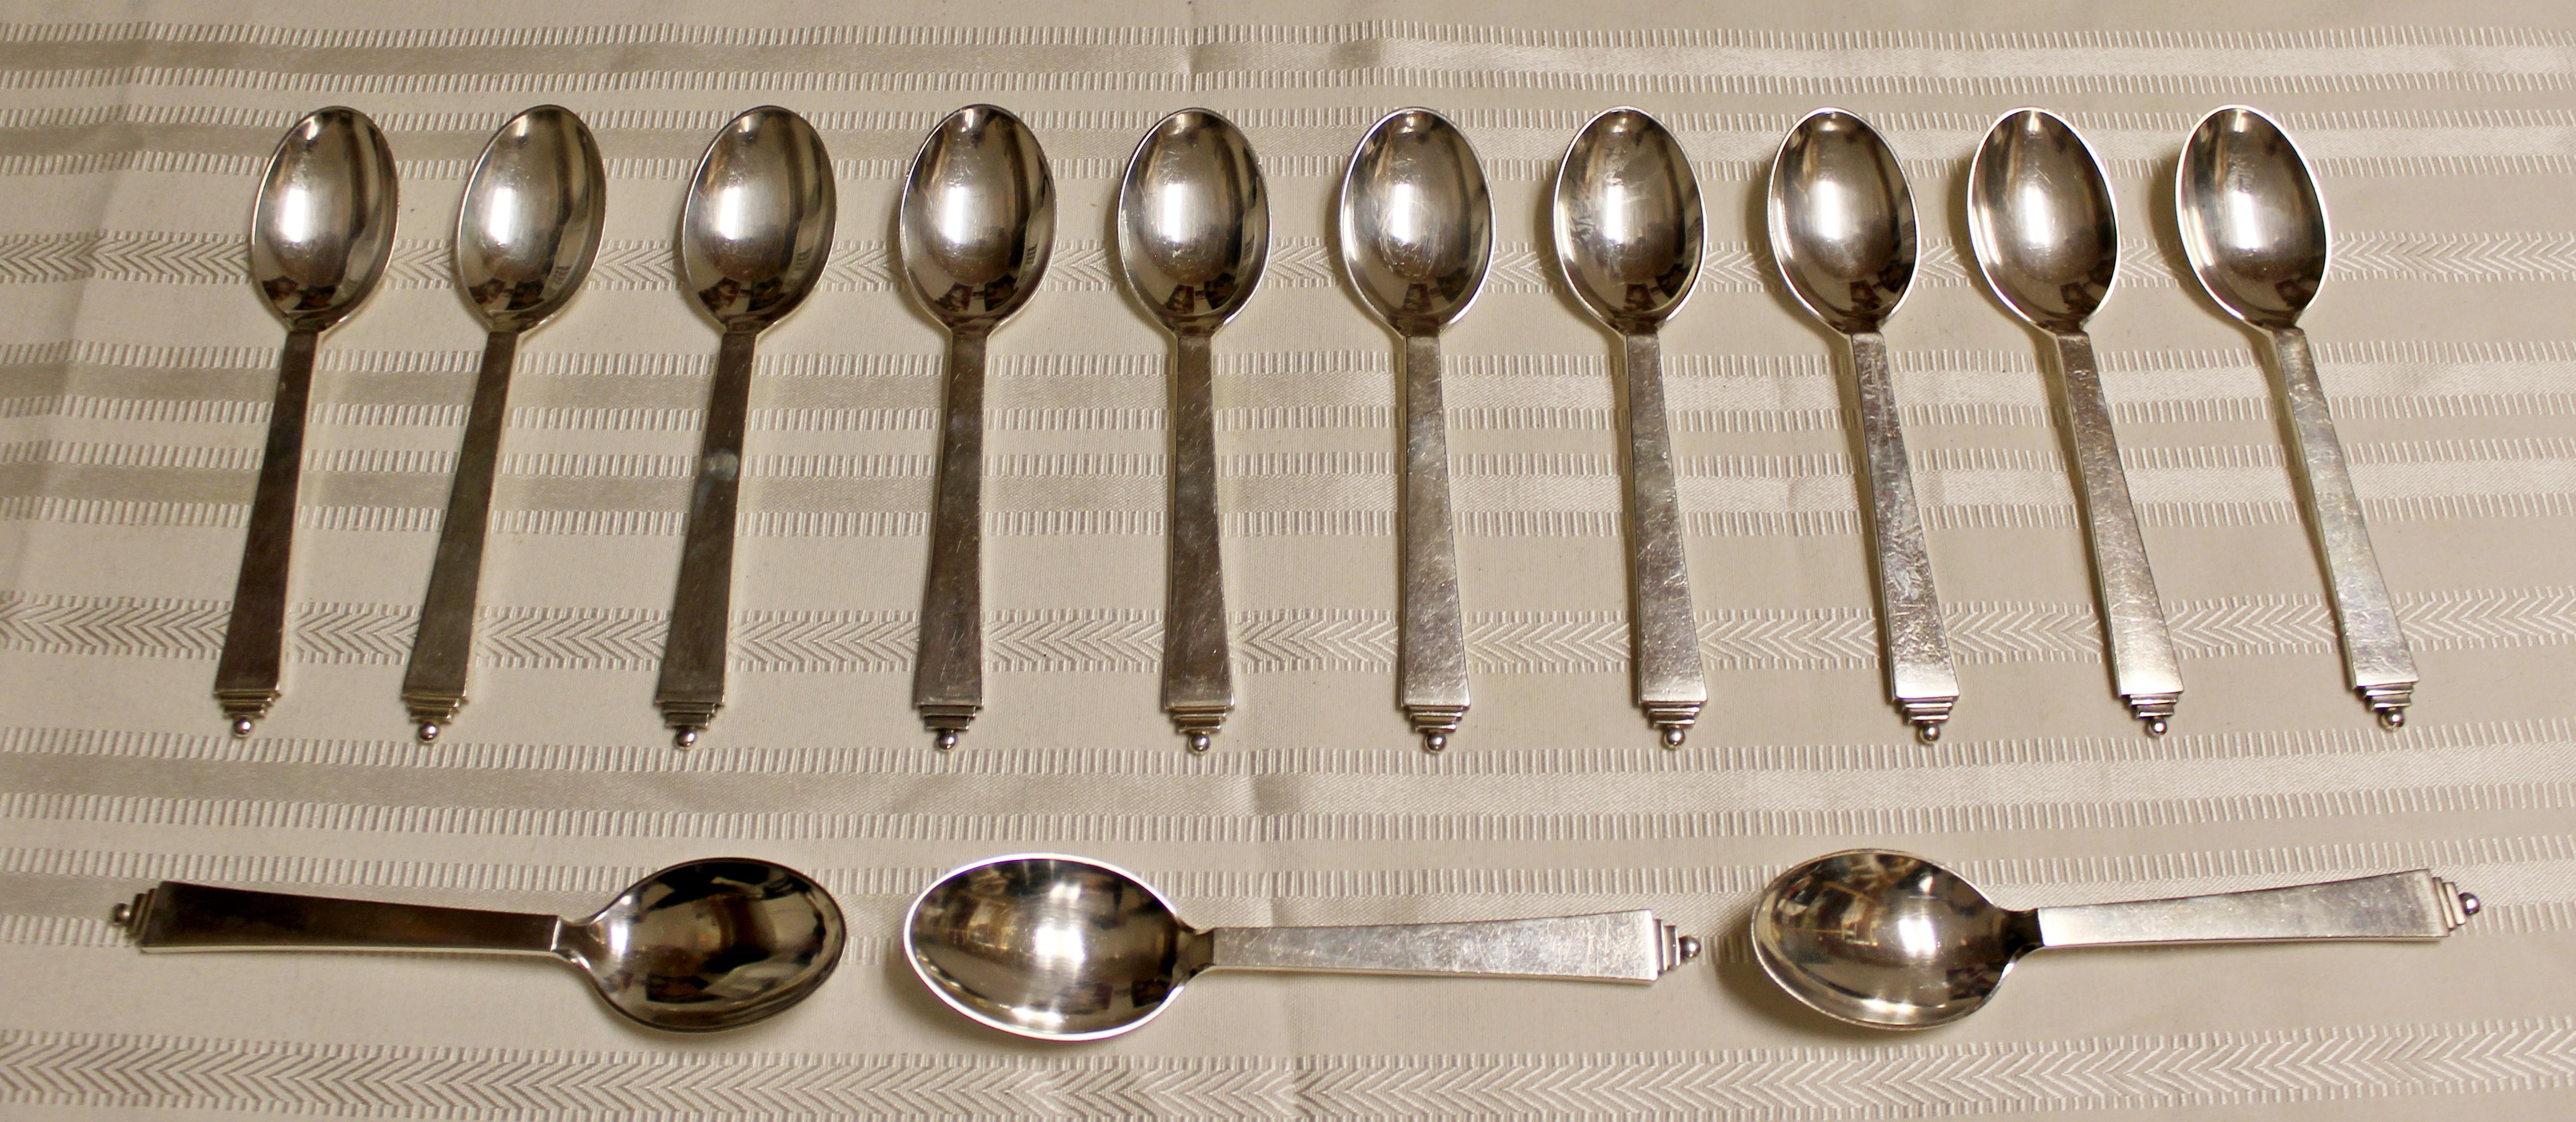 For your consideration is a fantastic set of 13 Georg Jensen, sterling silver pyramid pattern tea spoons, circa 1945. In excellent vintage condition. The dimensions are 5.5